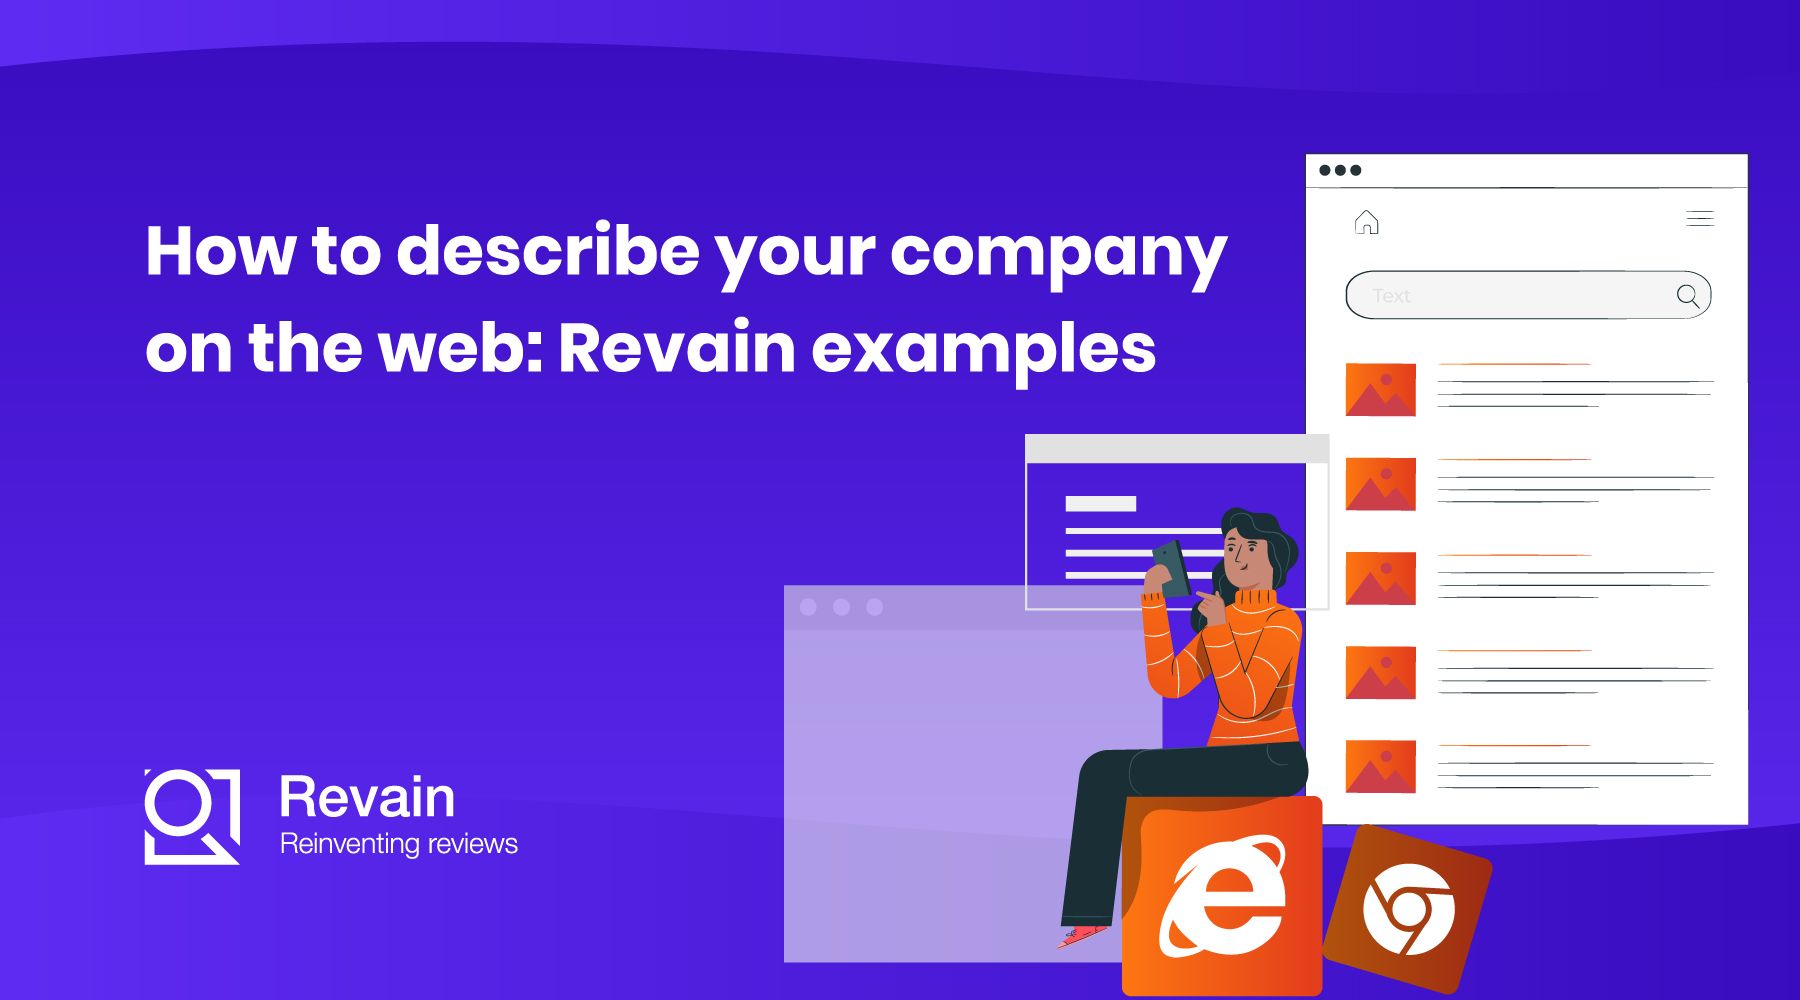 Article How to describe your company on the web: Revain examples